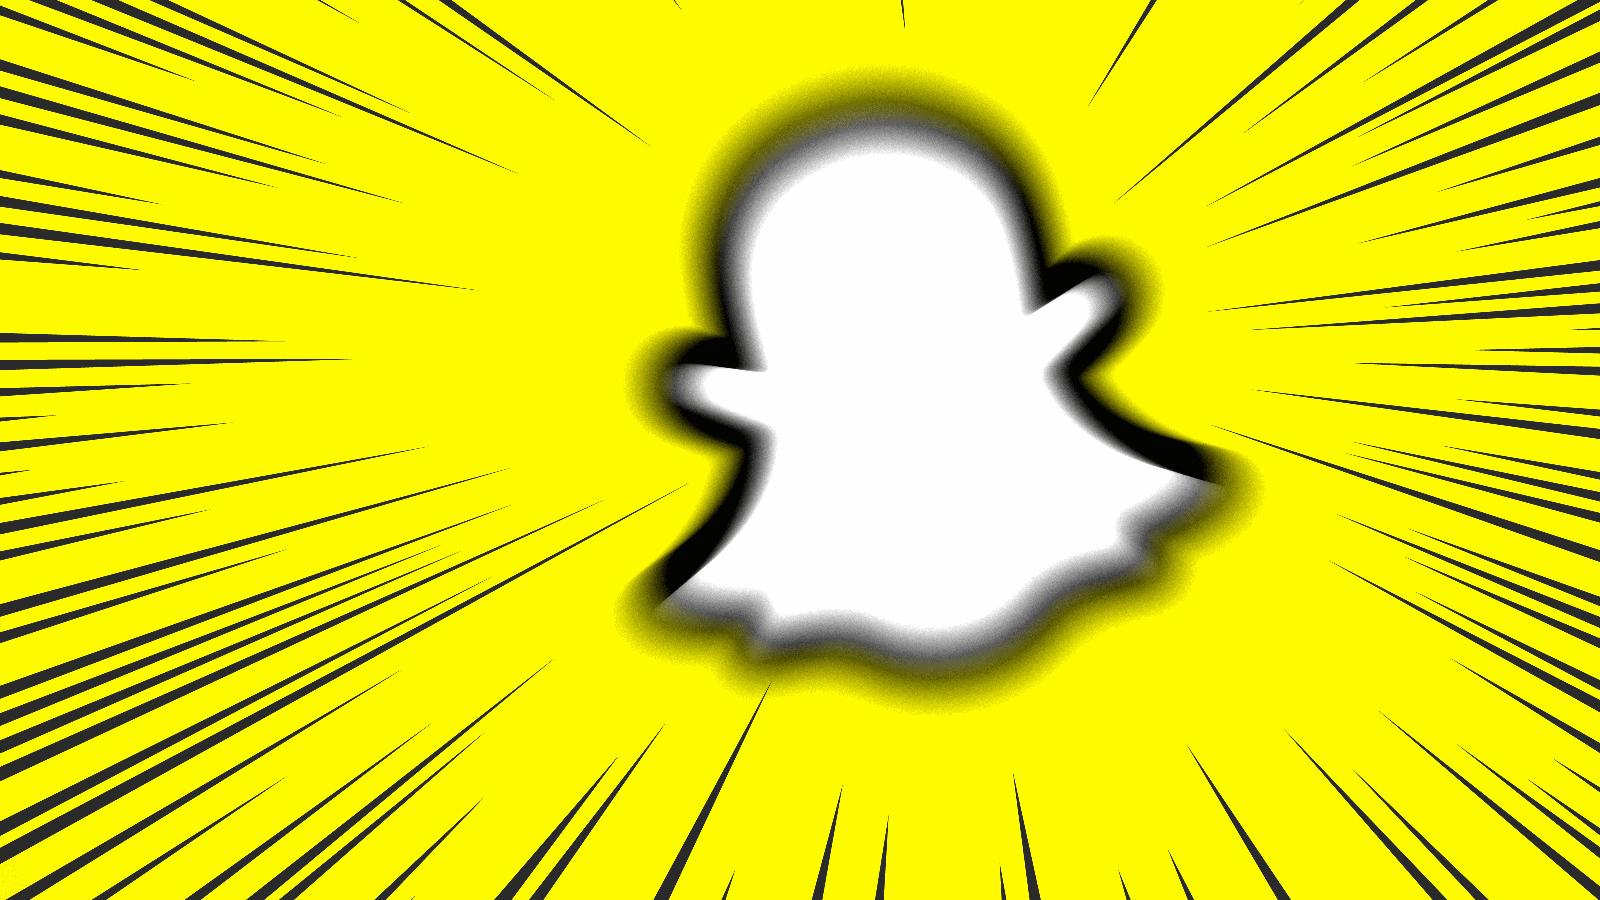 Snapchat adds new teen safety features, cracks down on age-inappropriate content